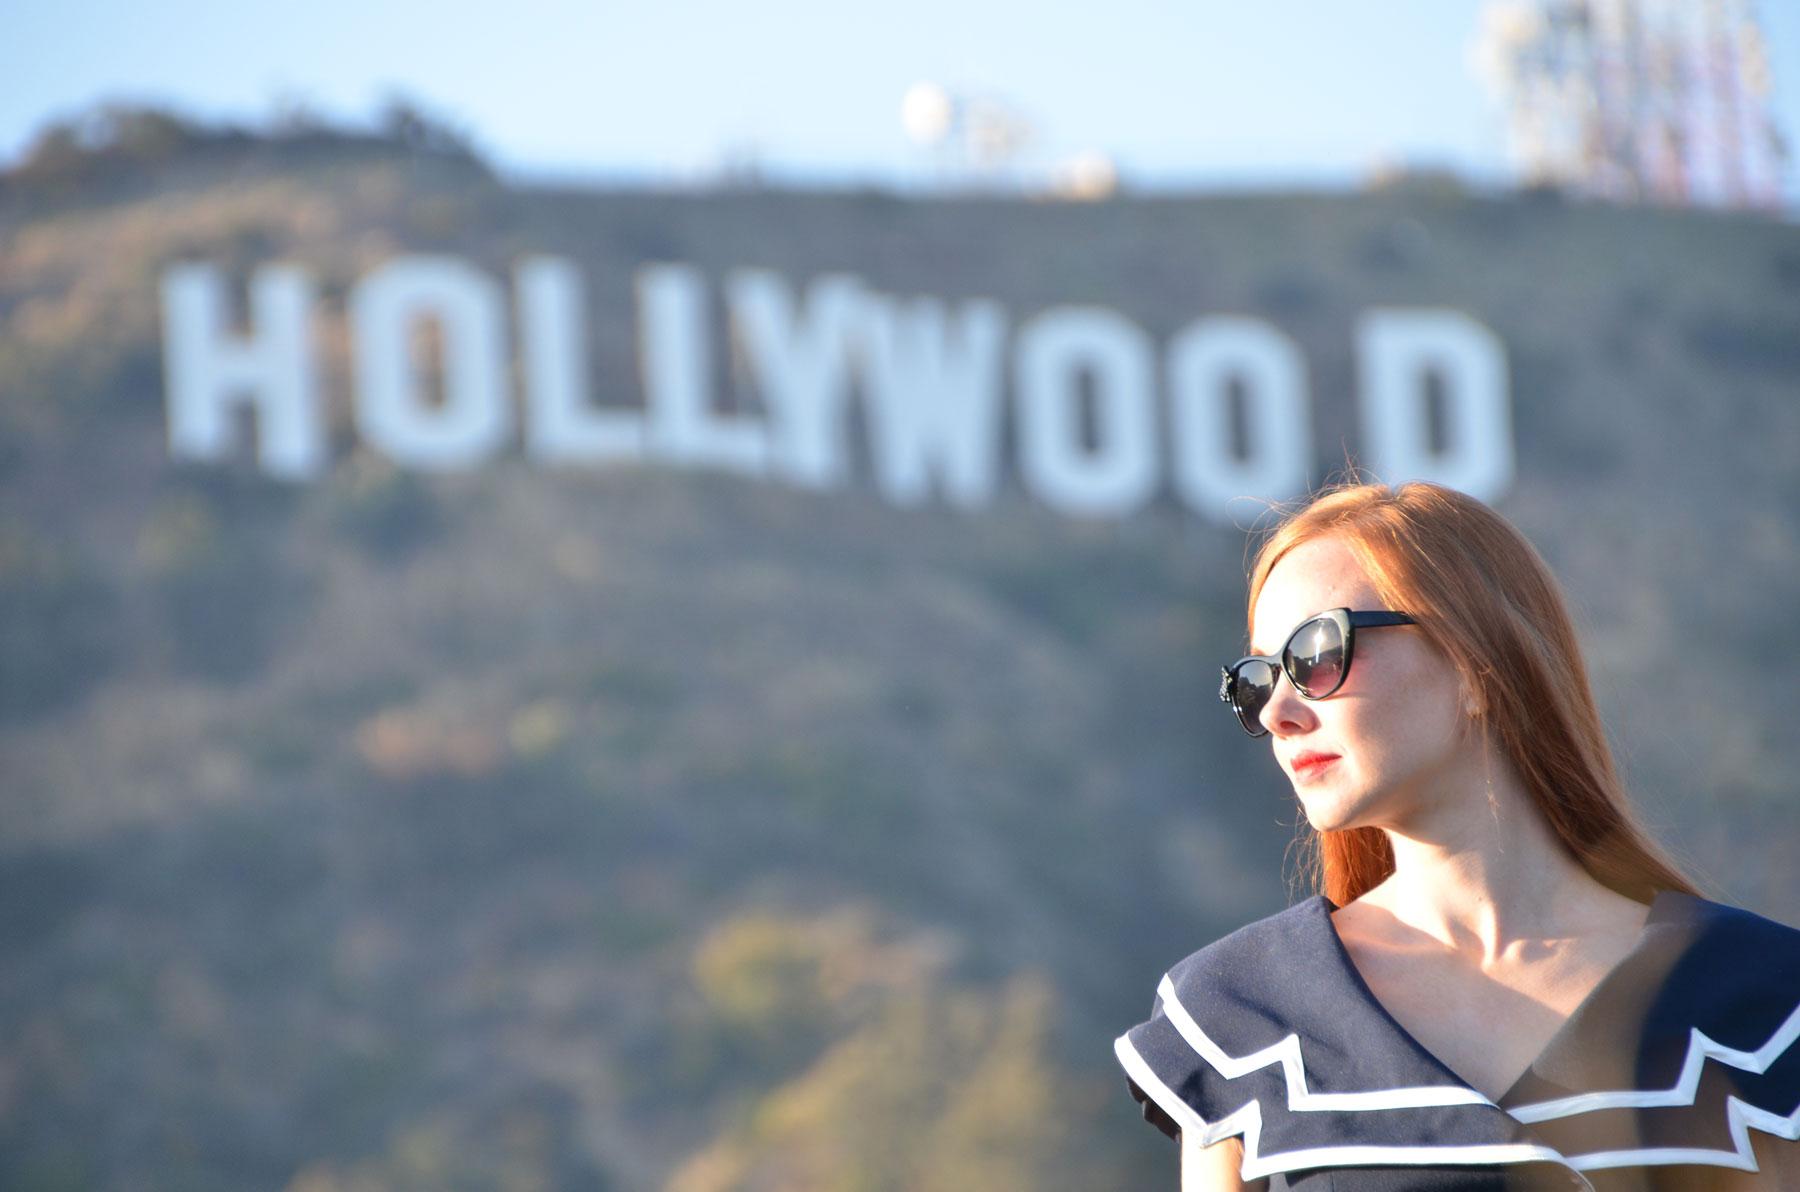 Standing in front of the Hollywood sign, California